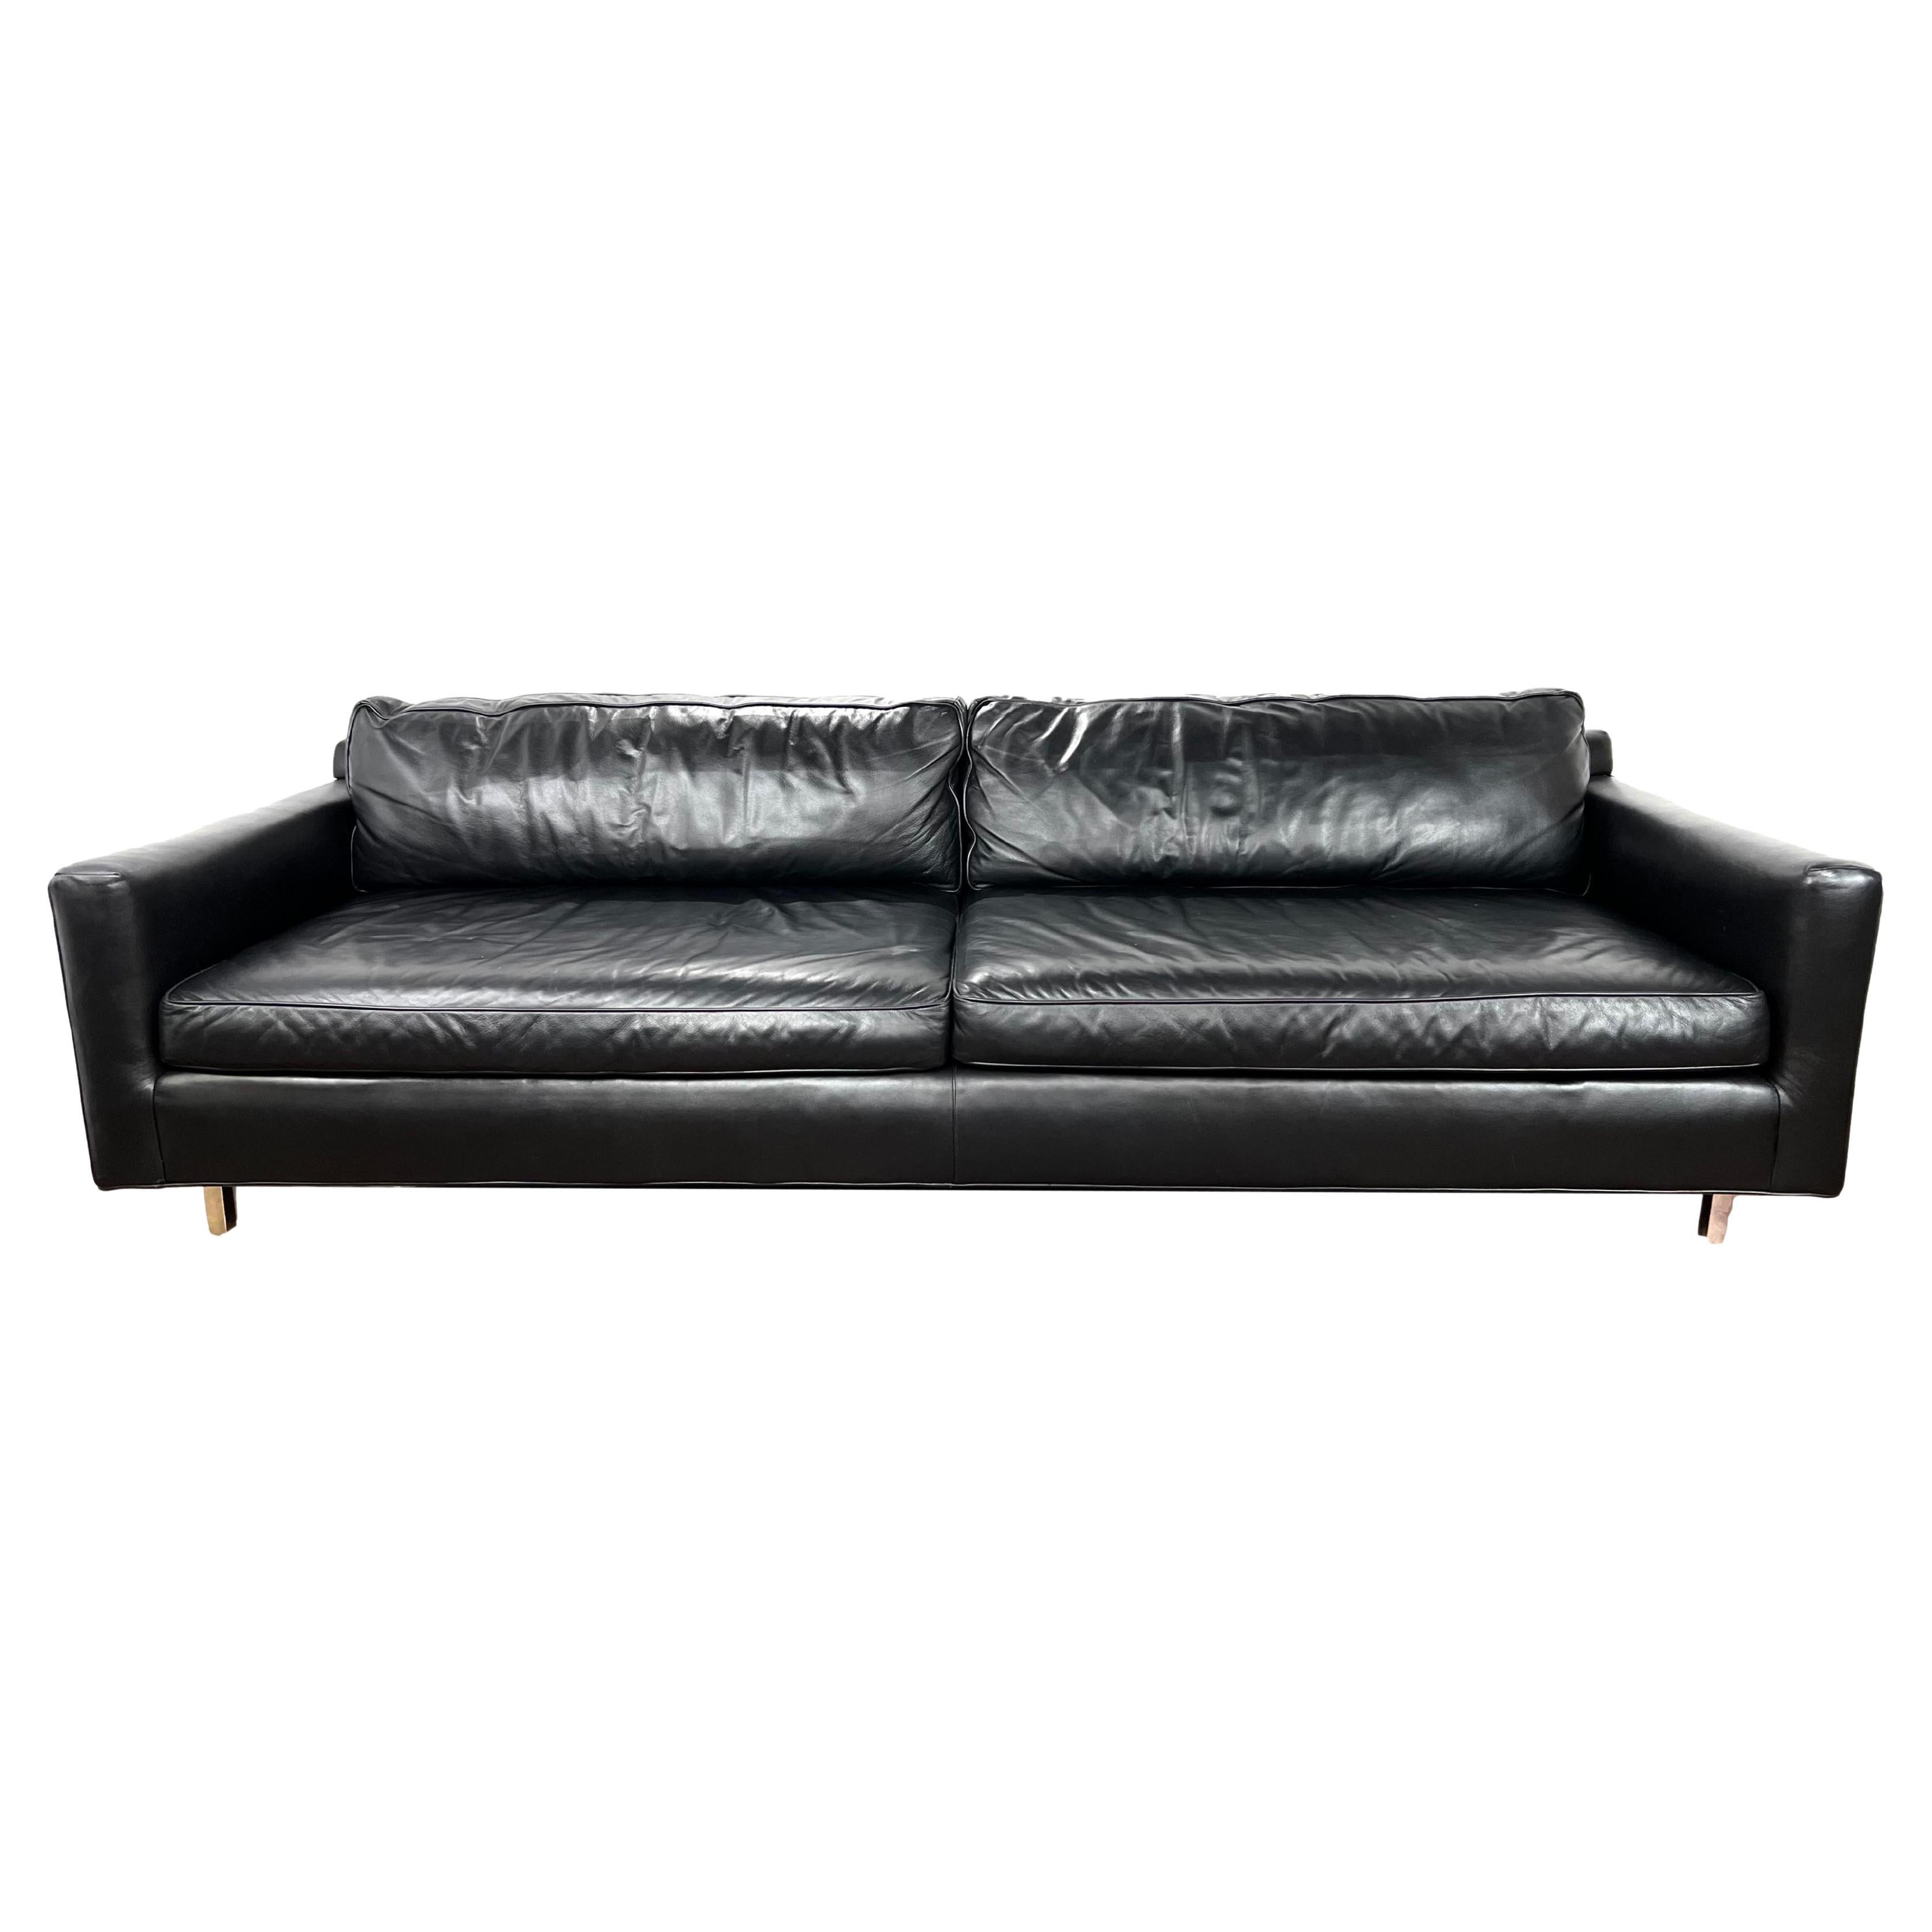 Mitchell Gold + Bob Williams "Hunter" Leather Sofa For Sale at 1stDibs